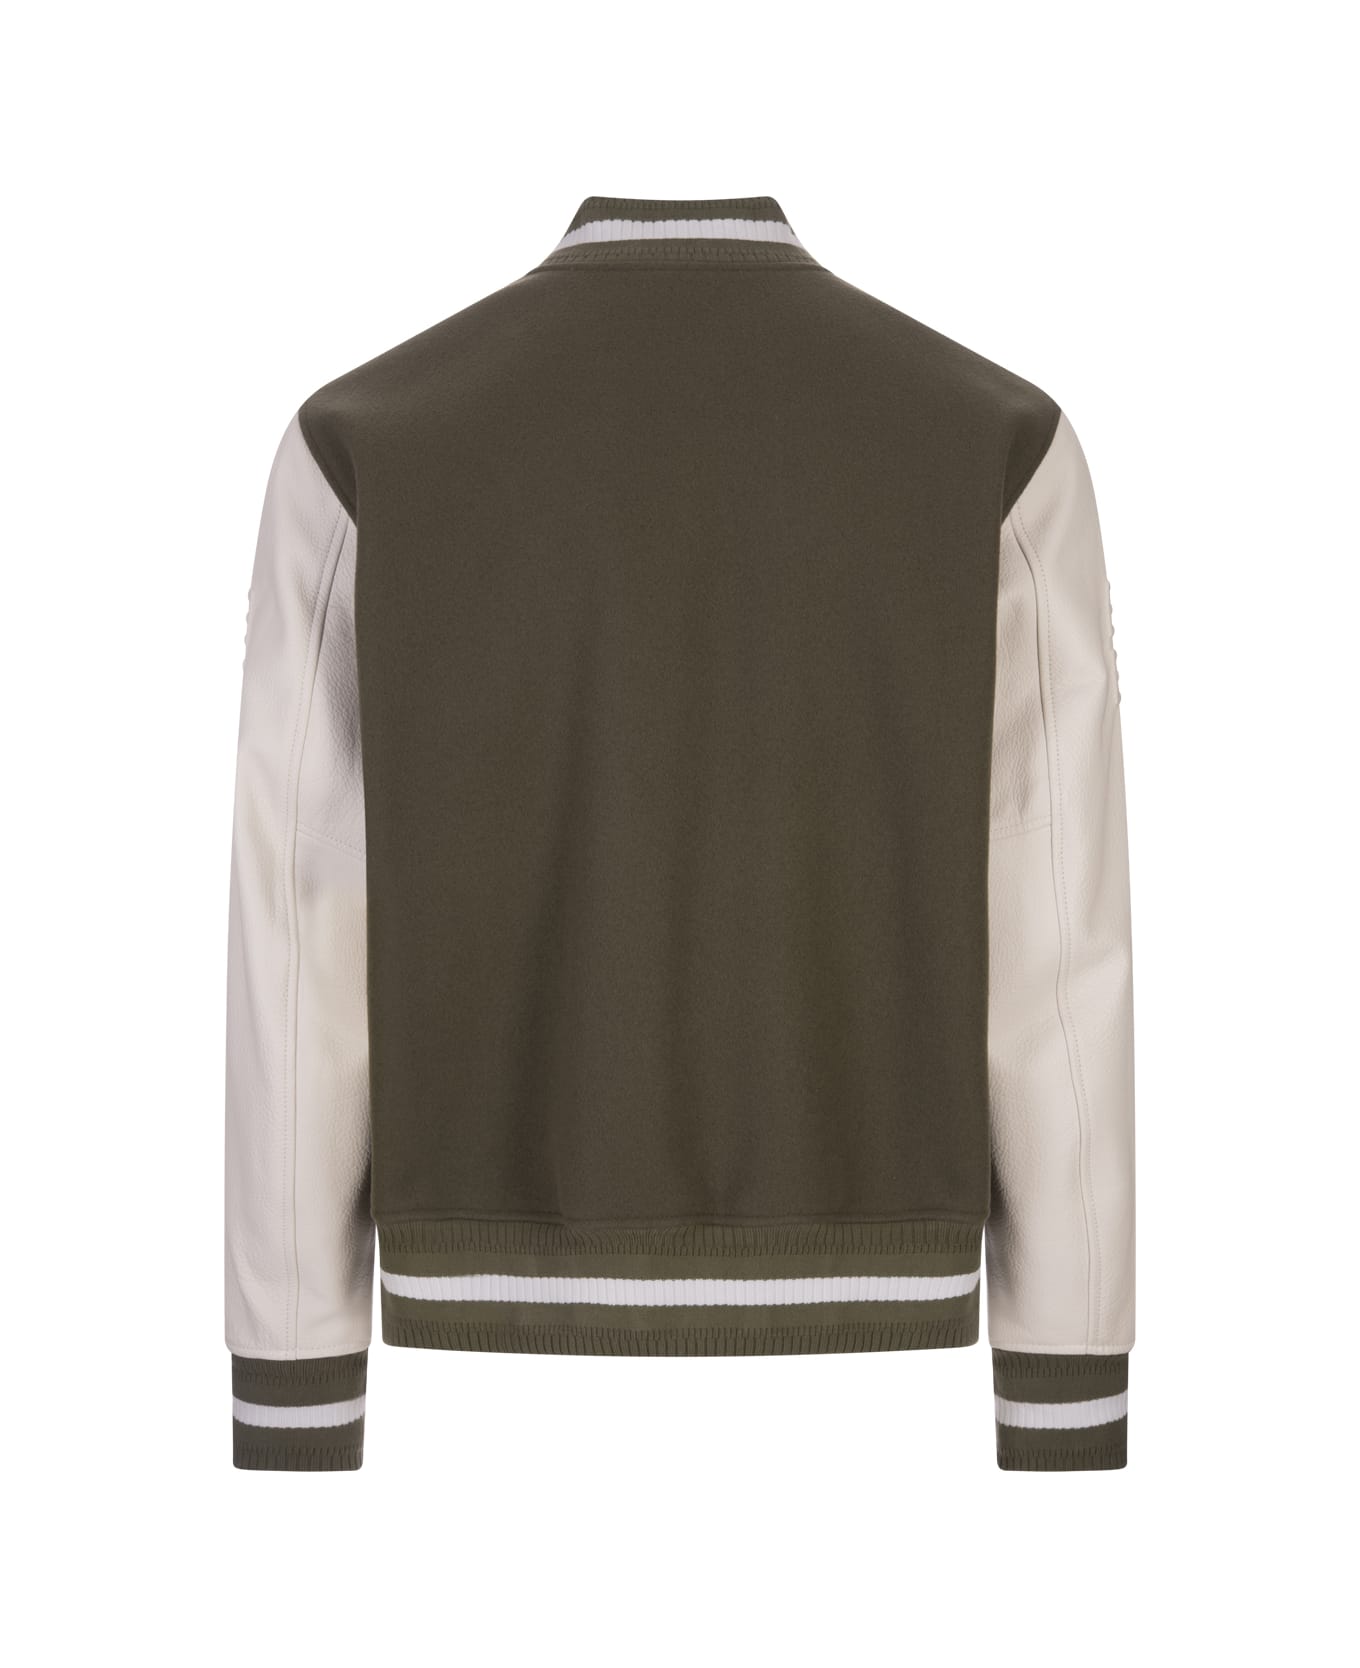 Givenchy Khaki And White Givenchy Bomber Jacket In Wool And Leather - Green